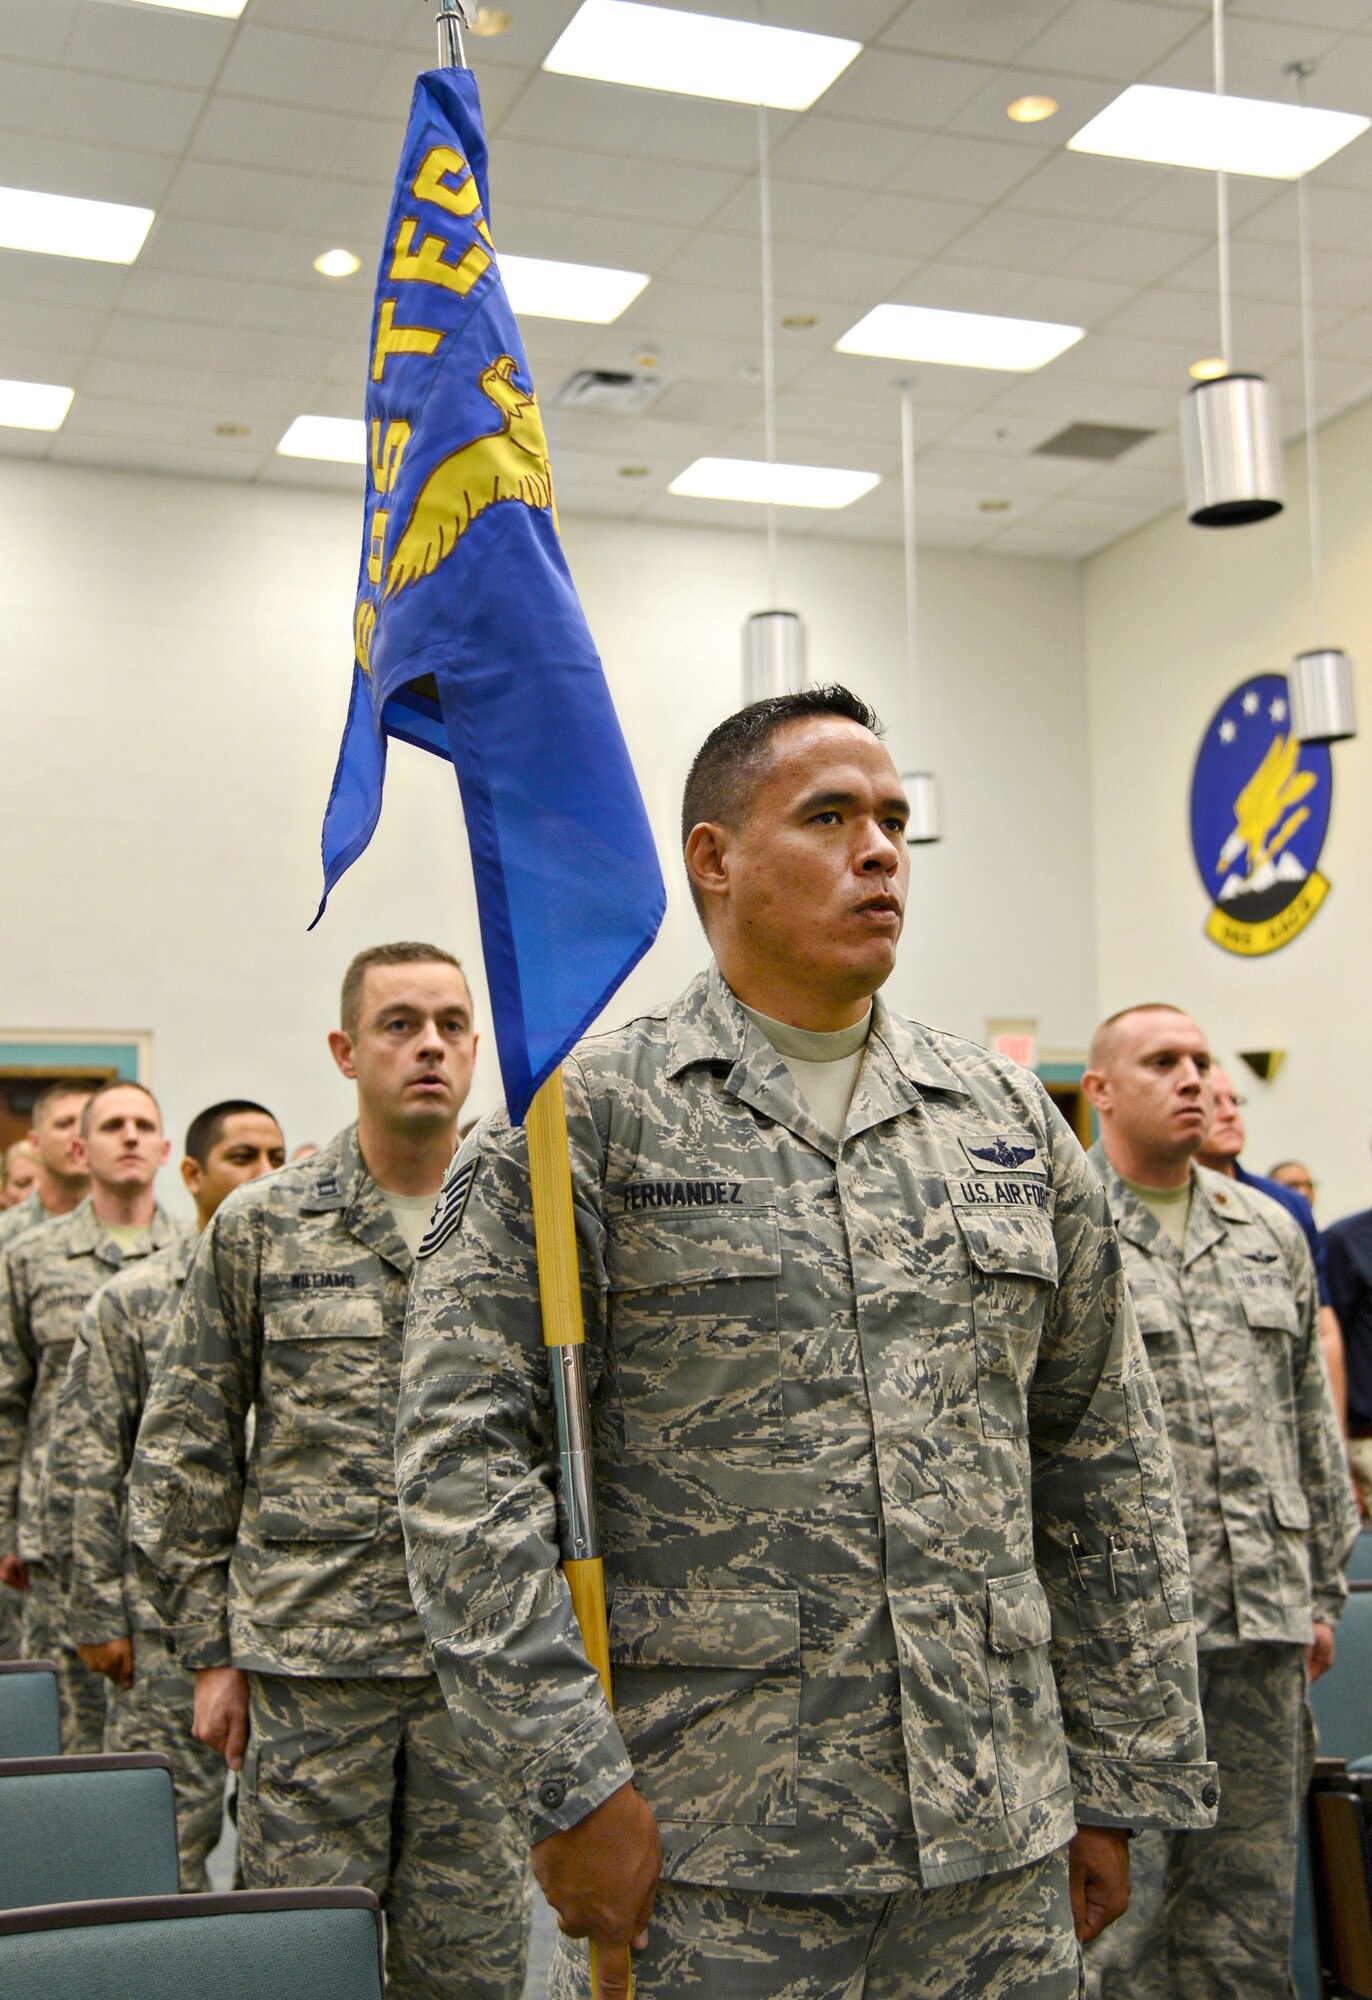 Tech. Sgt. Kamanu Fernandez, test flight engineer and additional duty first sergeant, holds the newly unfurled guidon for the 605th Test and Evaluation Squadron, Detachment 1, while in formation with his squadron during a ceremony Aug. 7, 2017, in Fannin Hall.